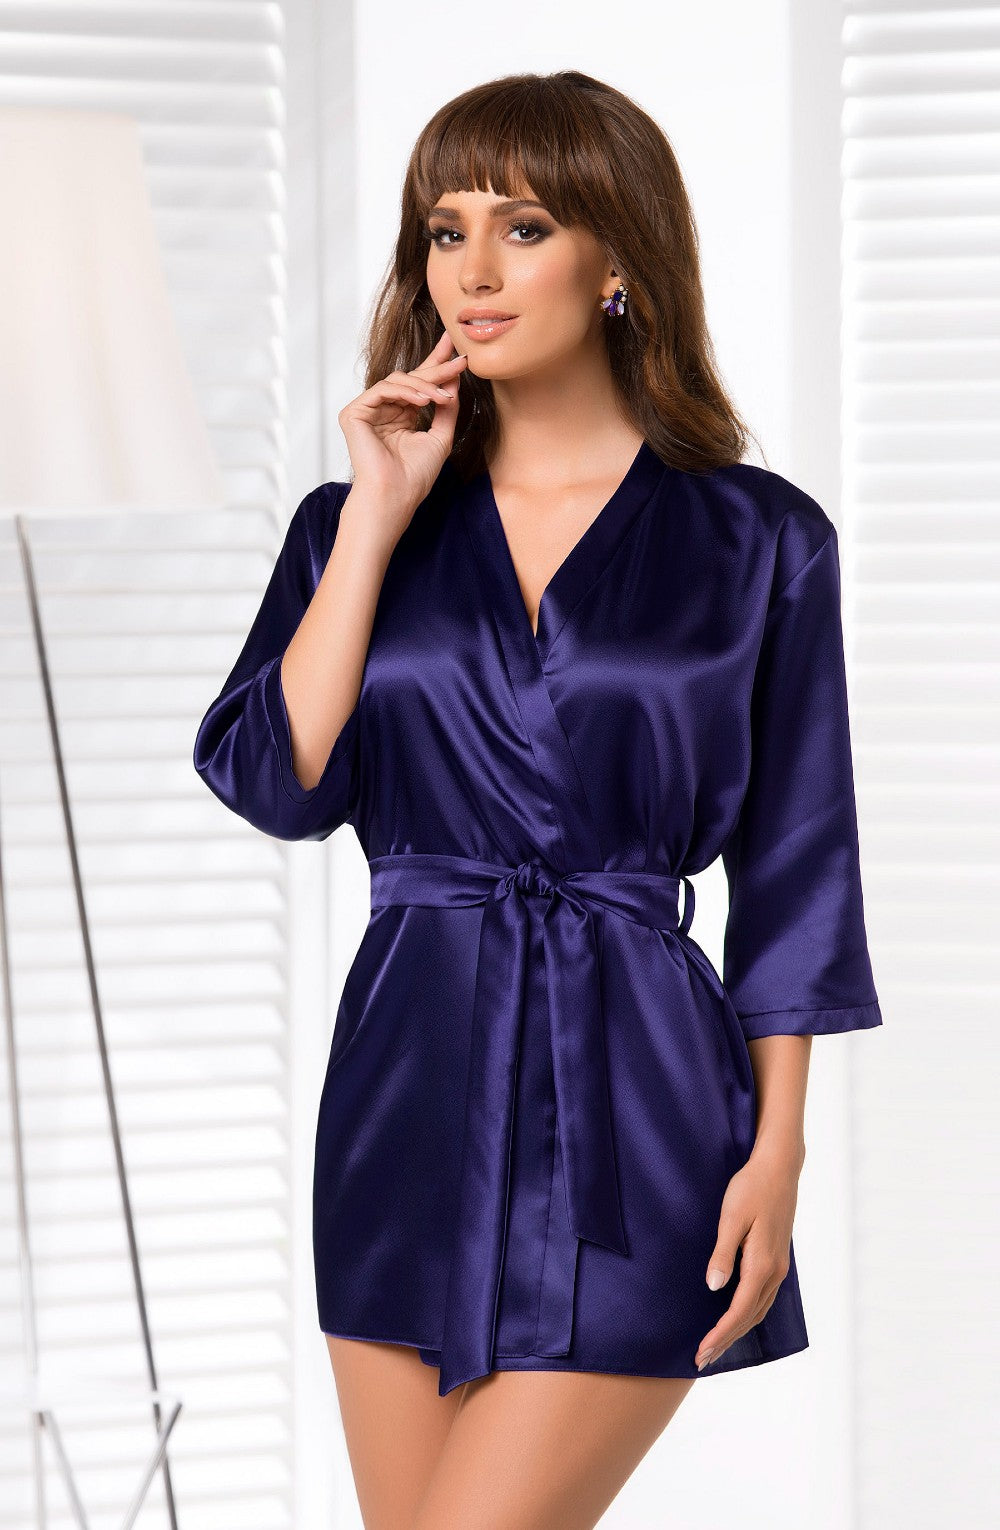 Vibrators, Sex Toy Kits and Sex Toys at Cloud9Adults - Irall Aria Dressing Gown Navy - Buy Sex Toys Online